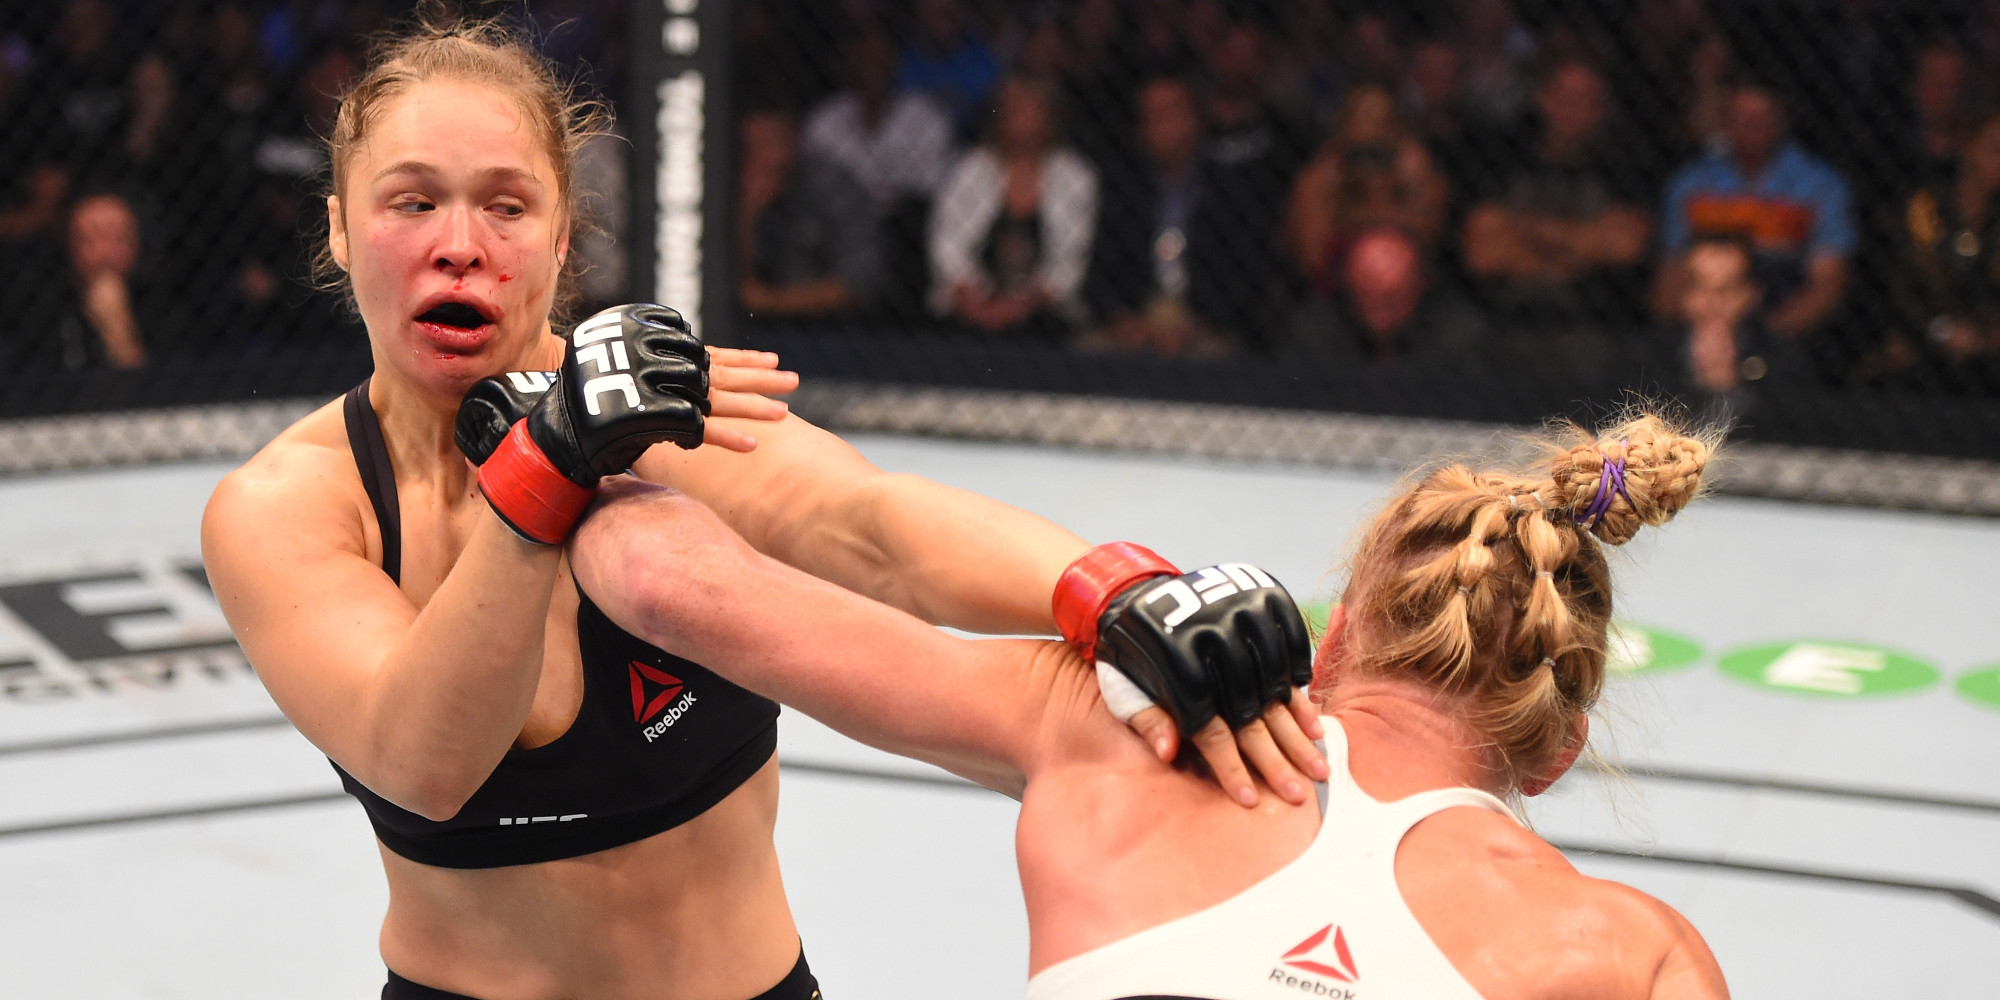 Ronda Rousey Biographer On Holm Rematch Legacy And How Ronda Makes Her